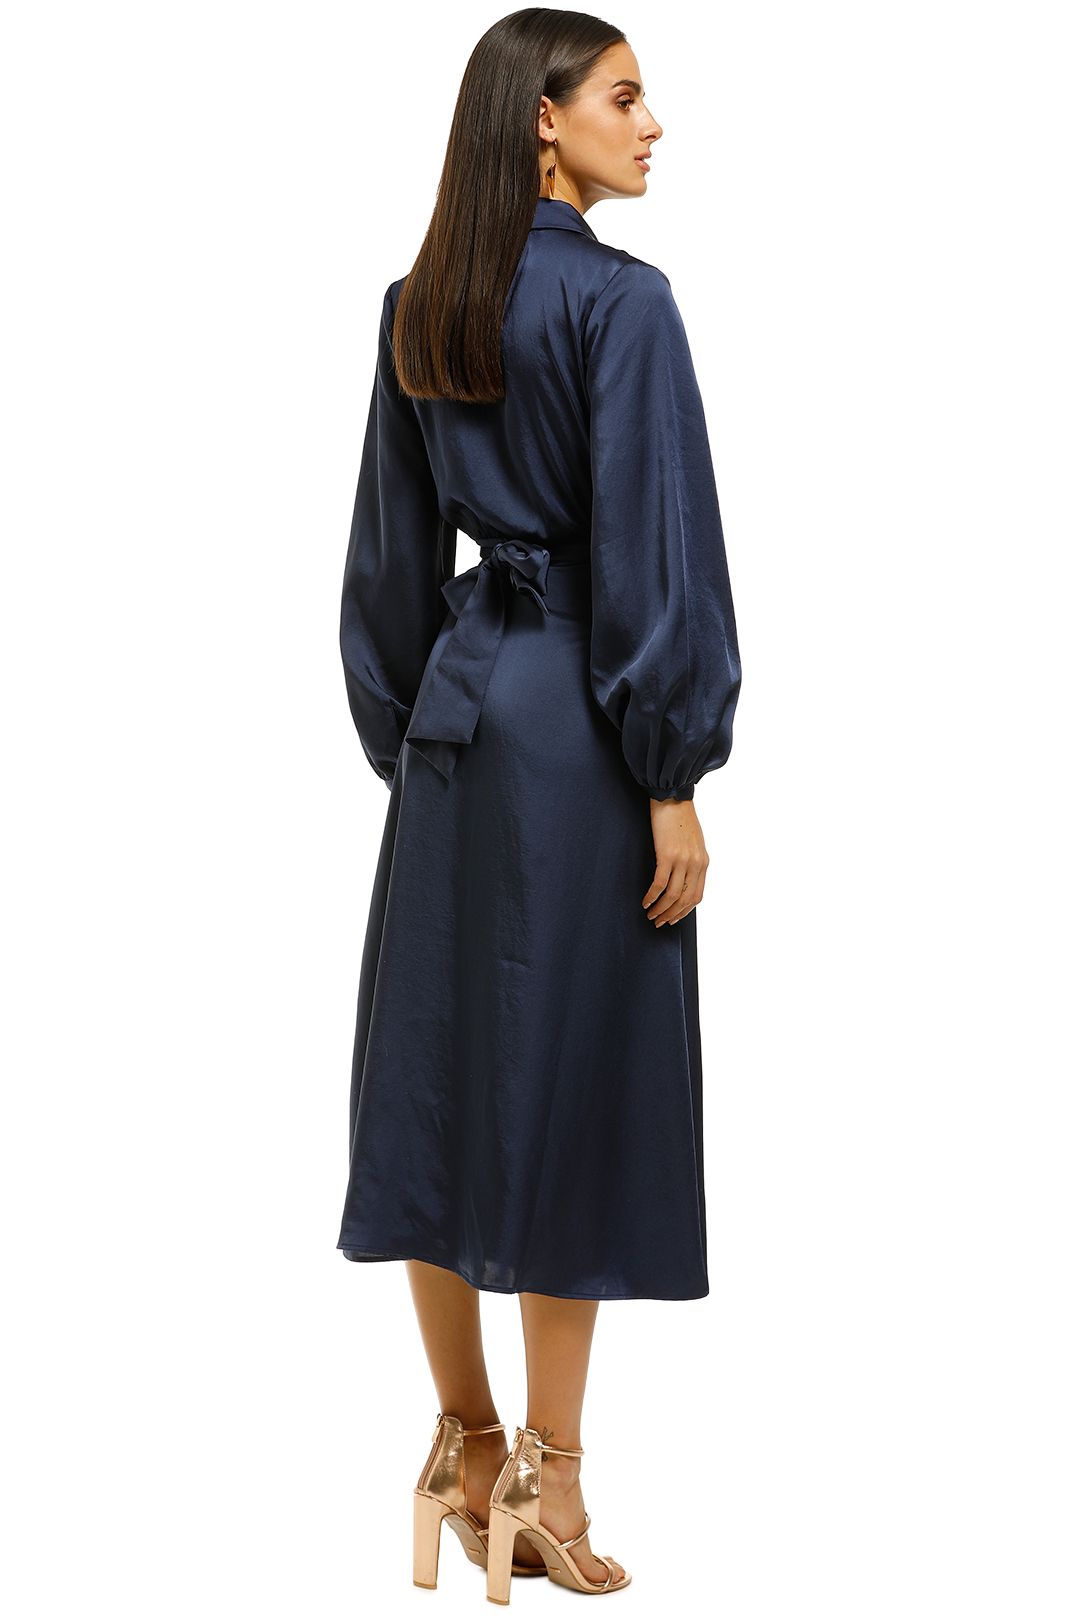 CMEO-Collective-Late-Thought-Midi-Dress-Navy-Back